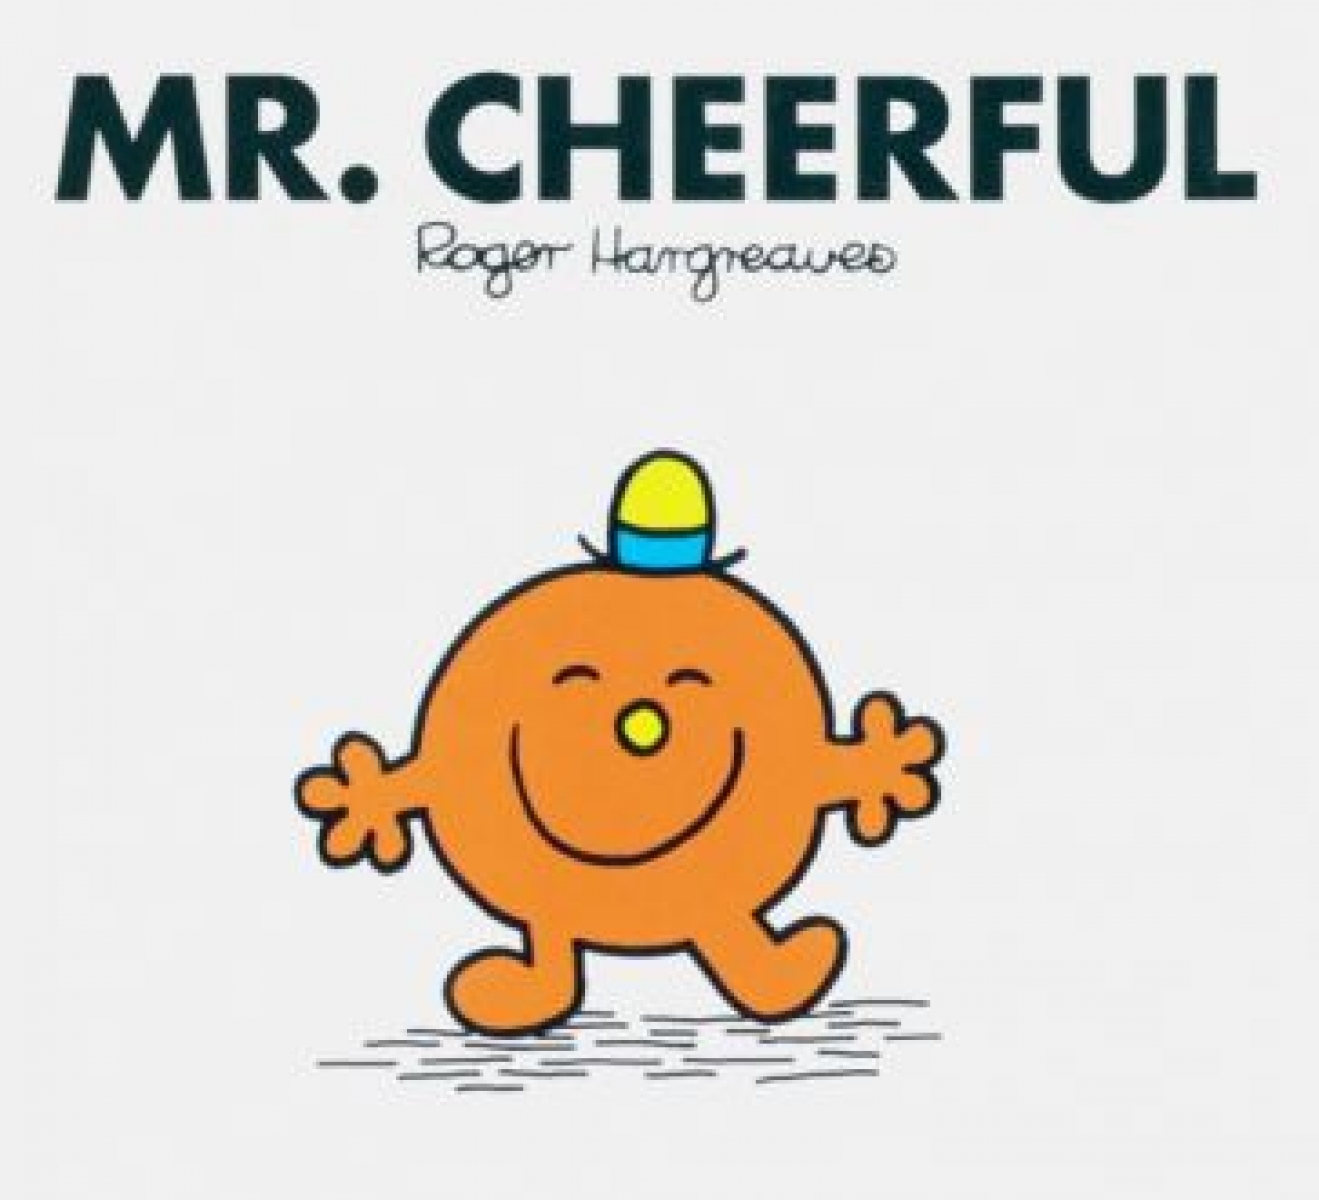 Hargreaves Roger Mr. Cheerful 